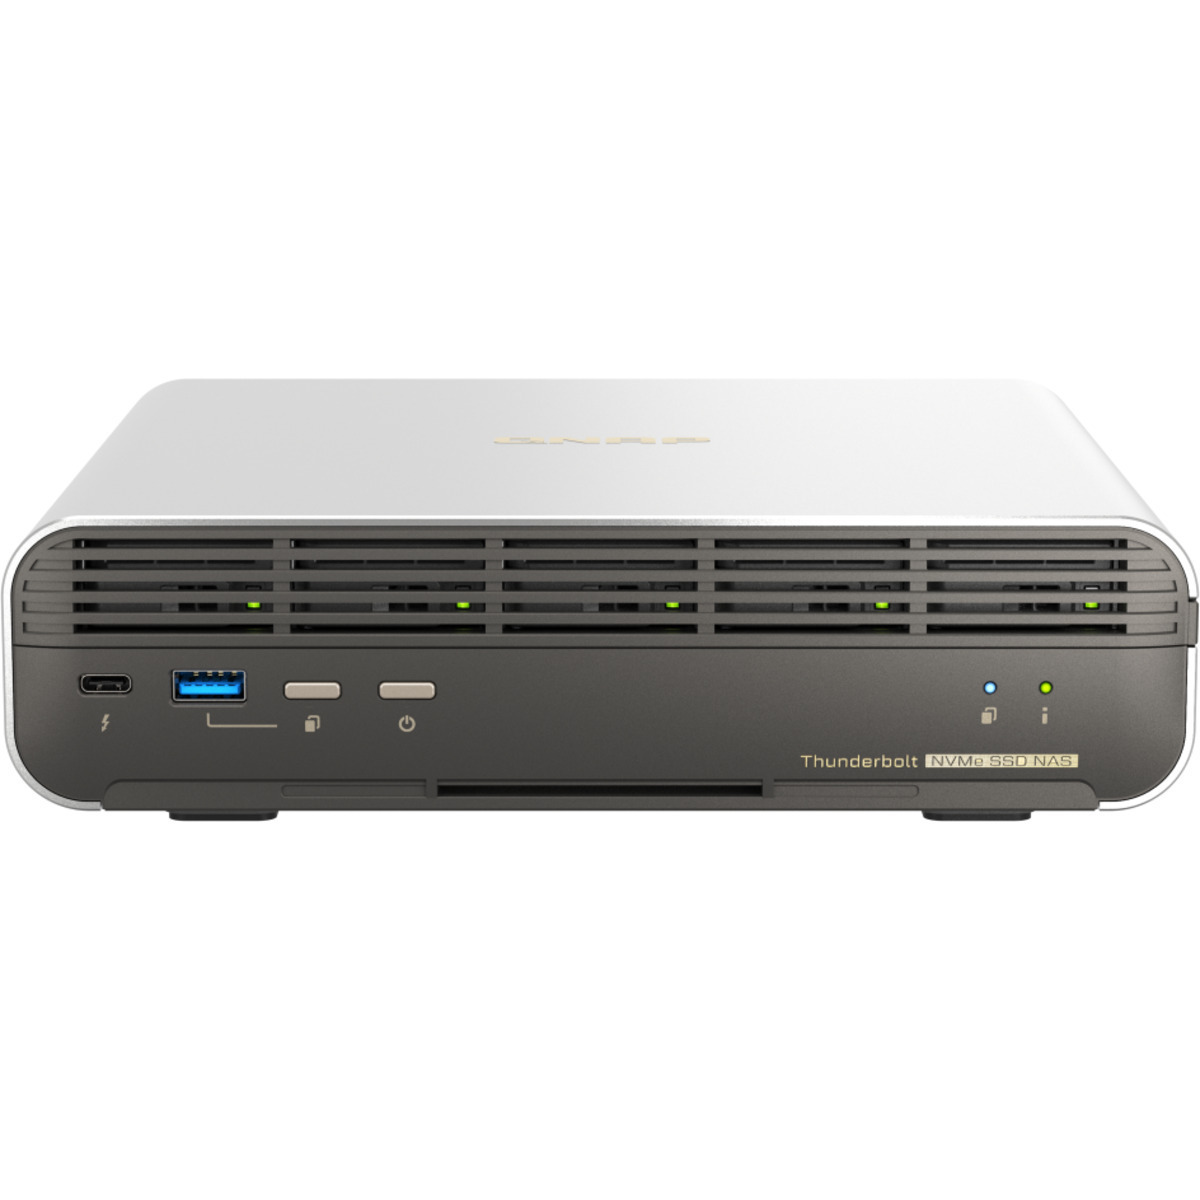 QNAP TBS-h574TX Core i3 Thunderbolt 4 2.5tb 5-Bay Desktop Multimedia / Power User / Business DAS-NAS - Combo Direct + Network Storage Device 5x500gb Sandisk Plus Series SDSSDA3N-500G  2400/1500MB/s M.2 2280 NVMe SSD CONSUMER Class Drives Installed - Burn-In Tested TBS-h574TX Core i3 Thunderbolt 4